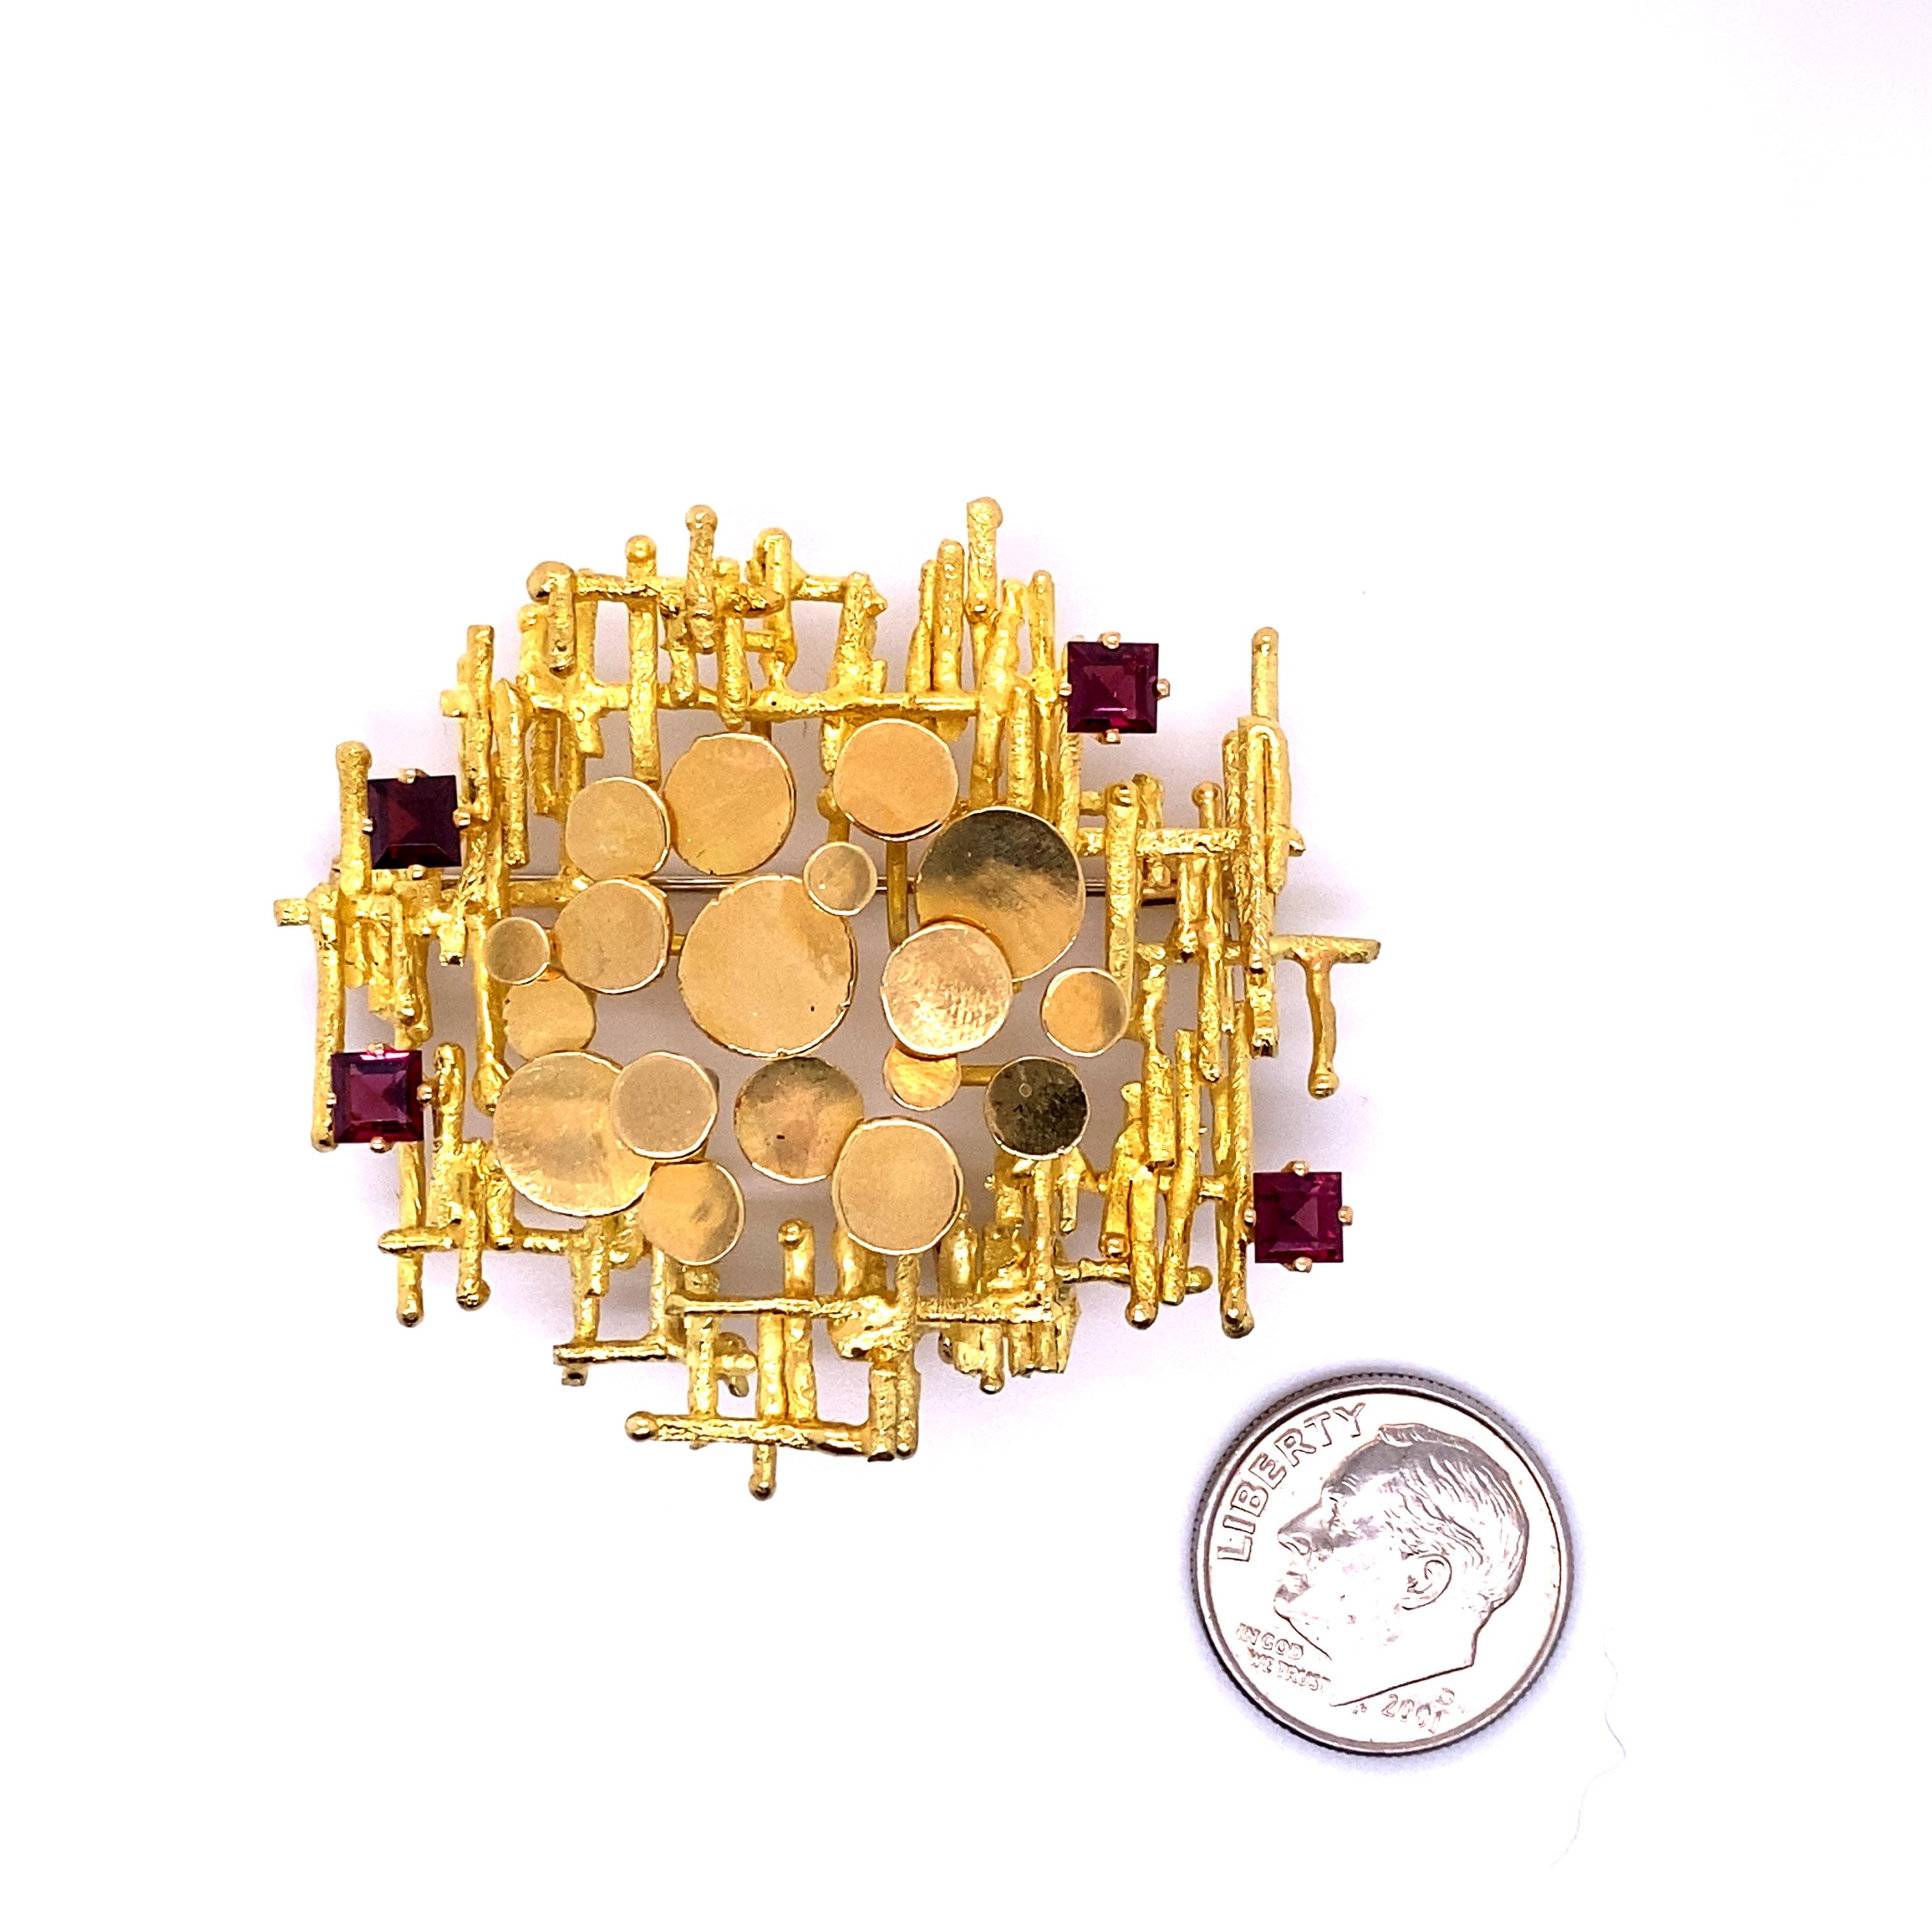 From Lucerne, Switzerland Vintage 18K Yellow Gold and Garnet Contemporary Brooch 5